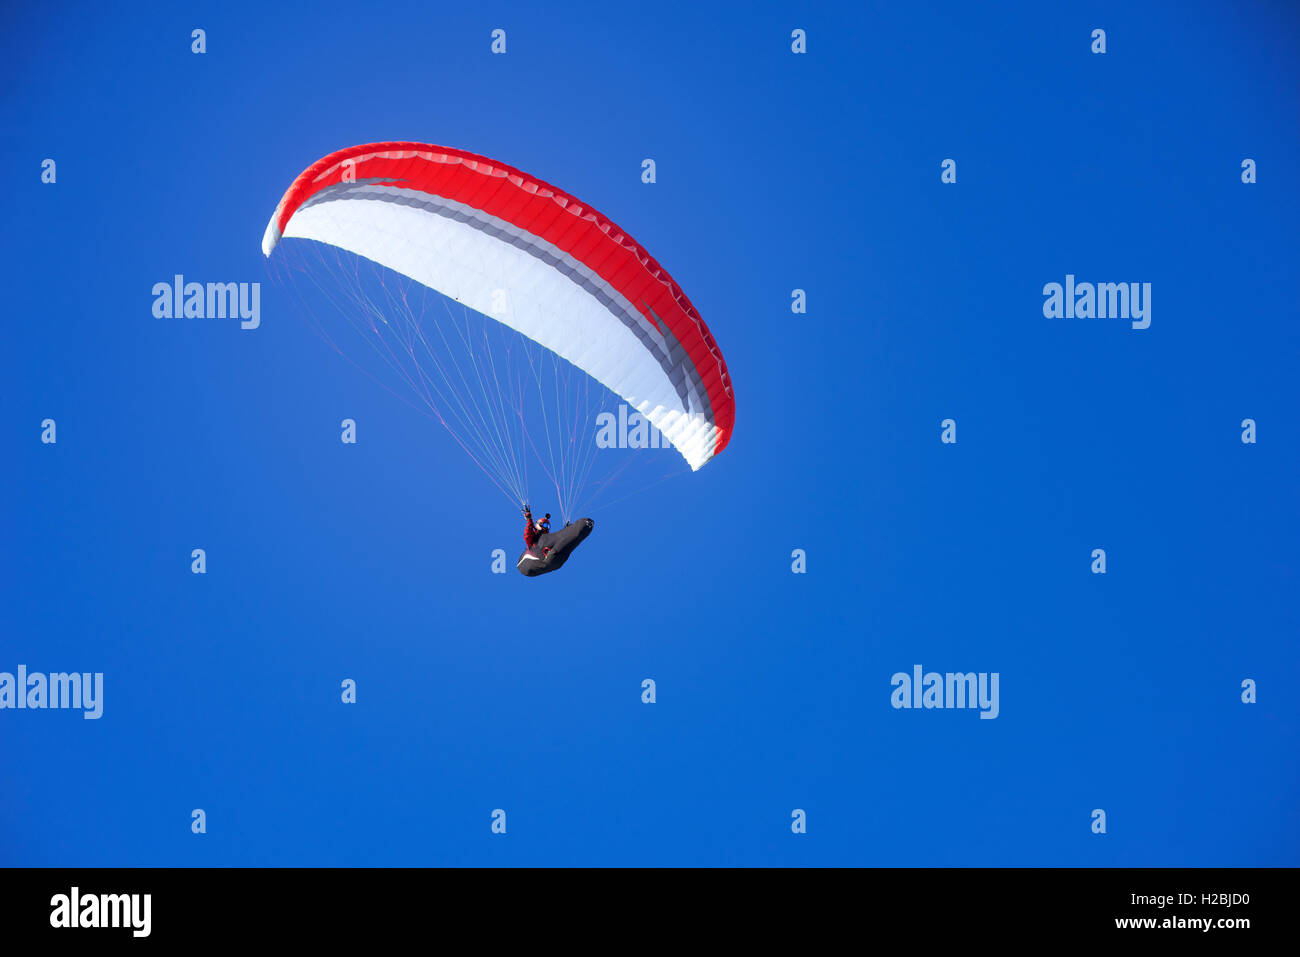 Skydiver flies in the blue sky Stock Photo